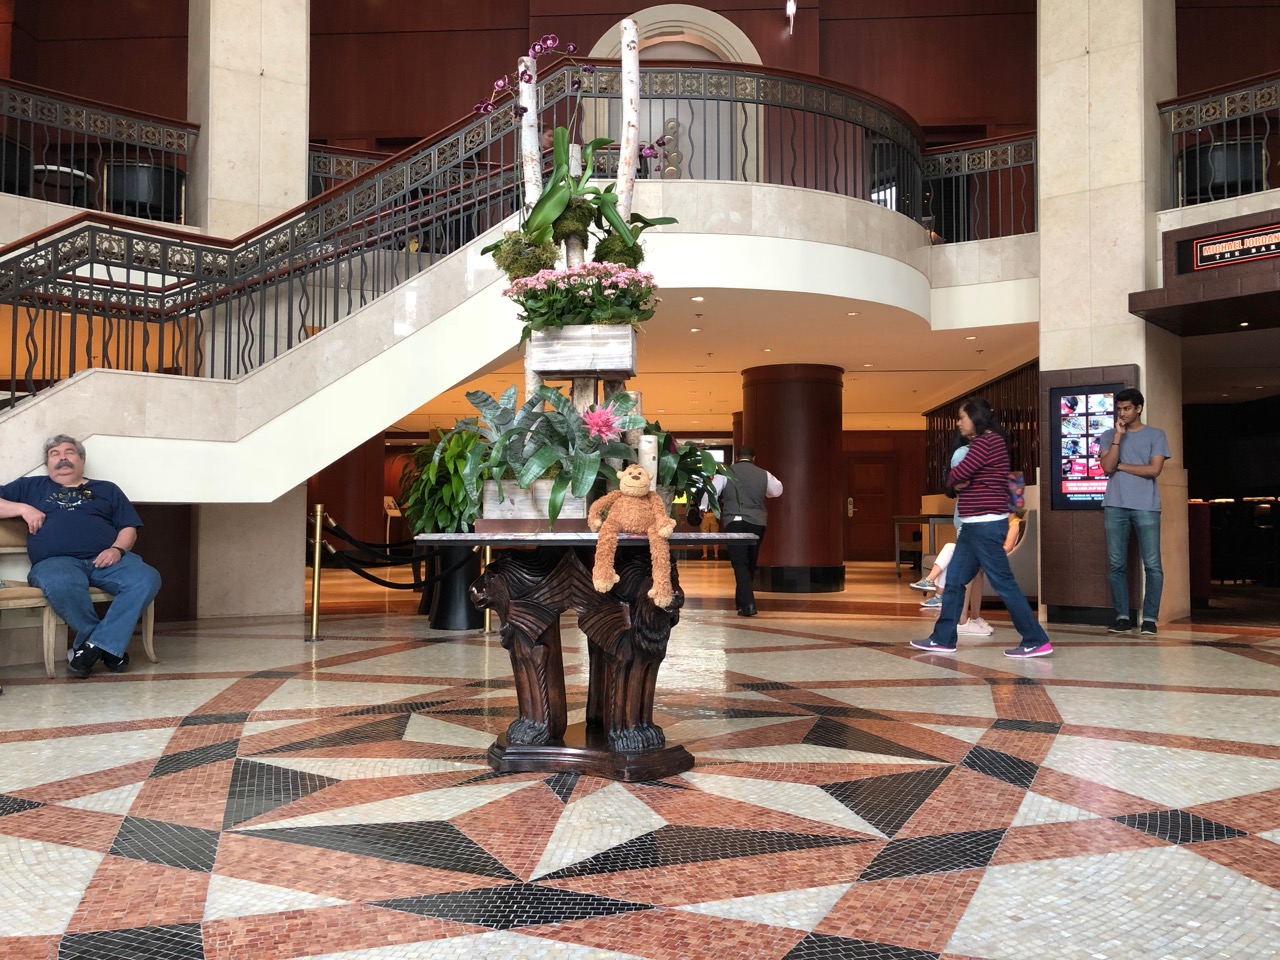 a large marble floor with a staircase and a statue of a teddy bear